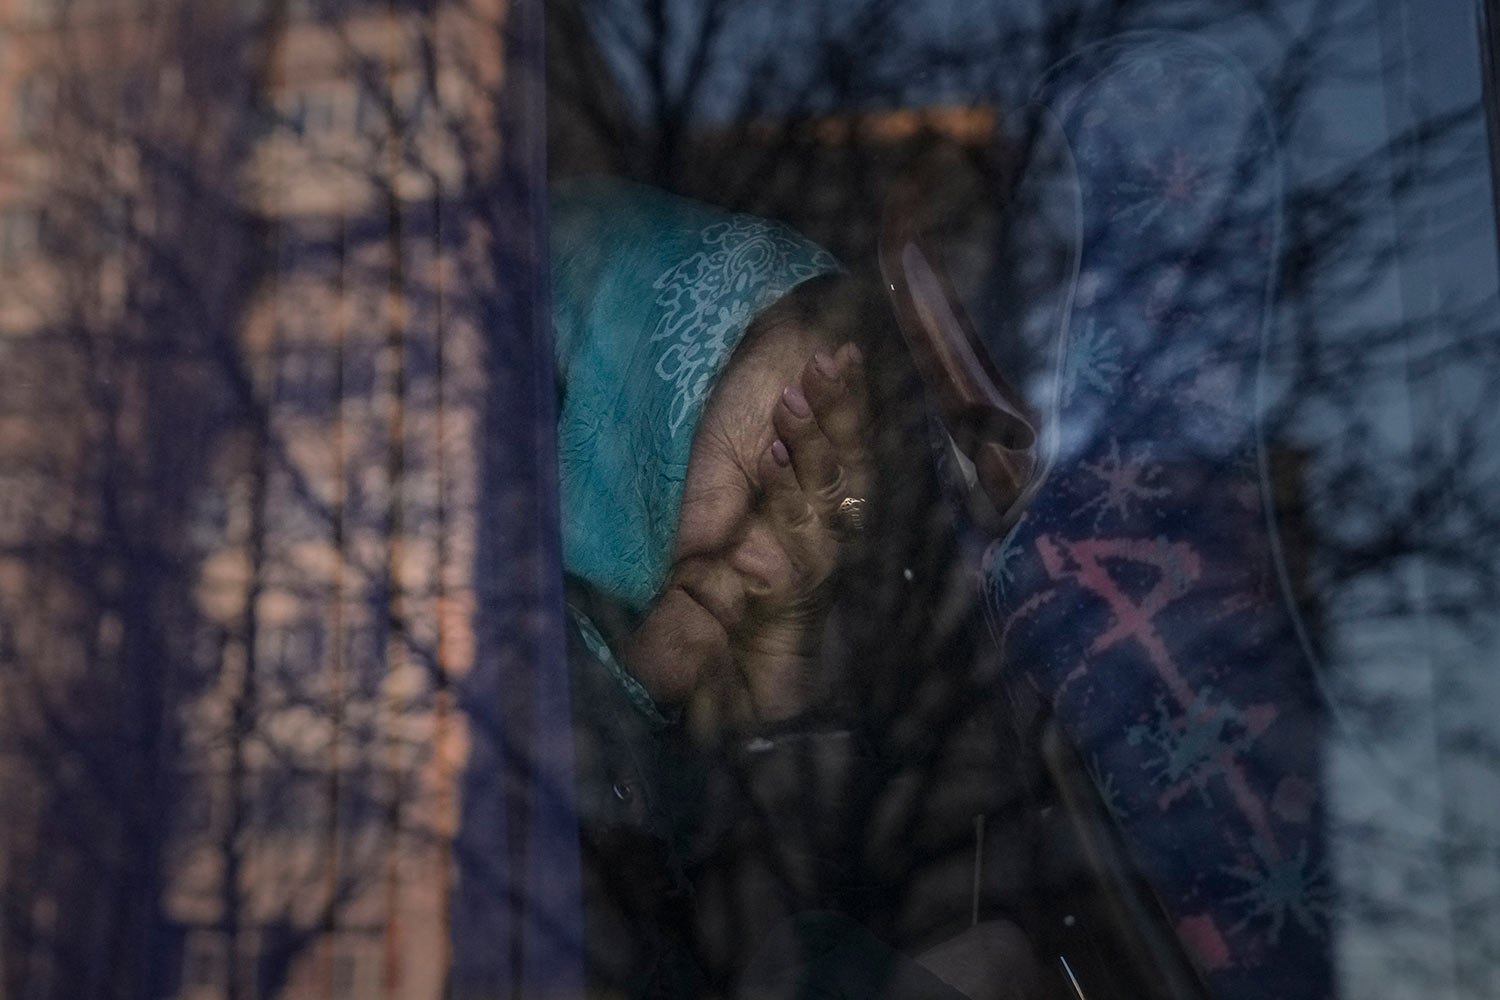  A refugee cries on a bus while waiting for Ukrainian police to check papers and belongings in Brovary, Ukraine, Sunday, March 20, 2022, after being evacuated from the village of Bobrik, reportedly under Russian military control. (AP Photo/Vadim Ghir